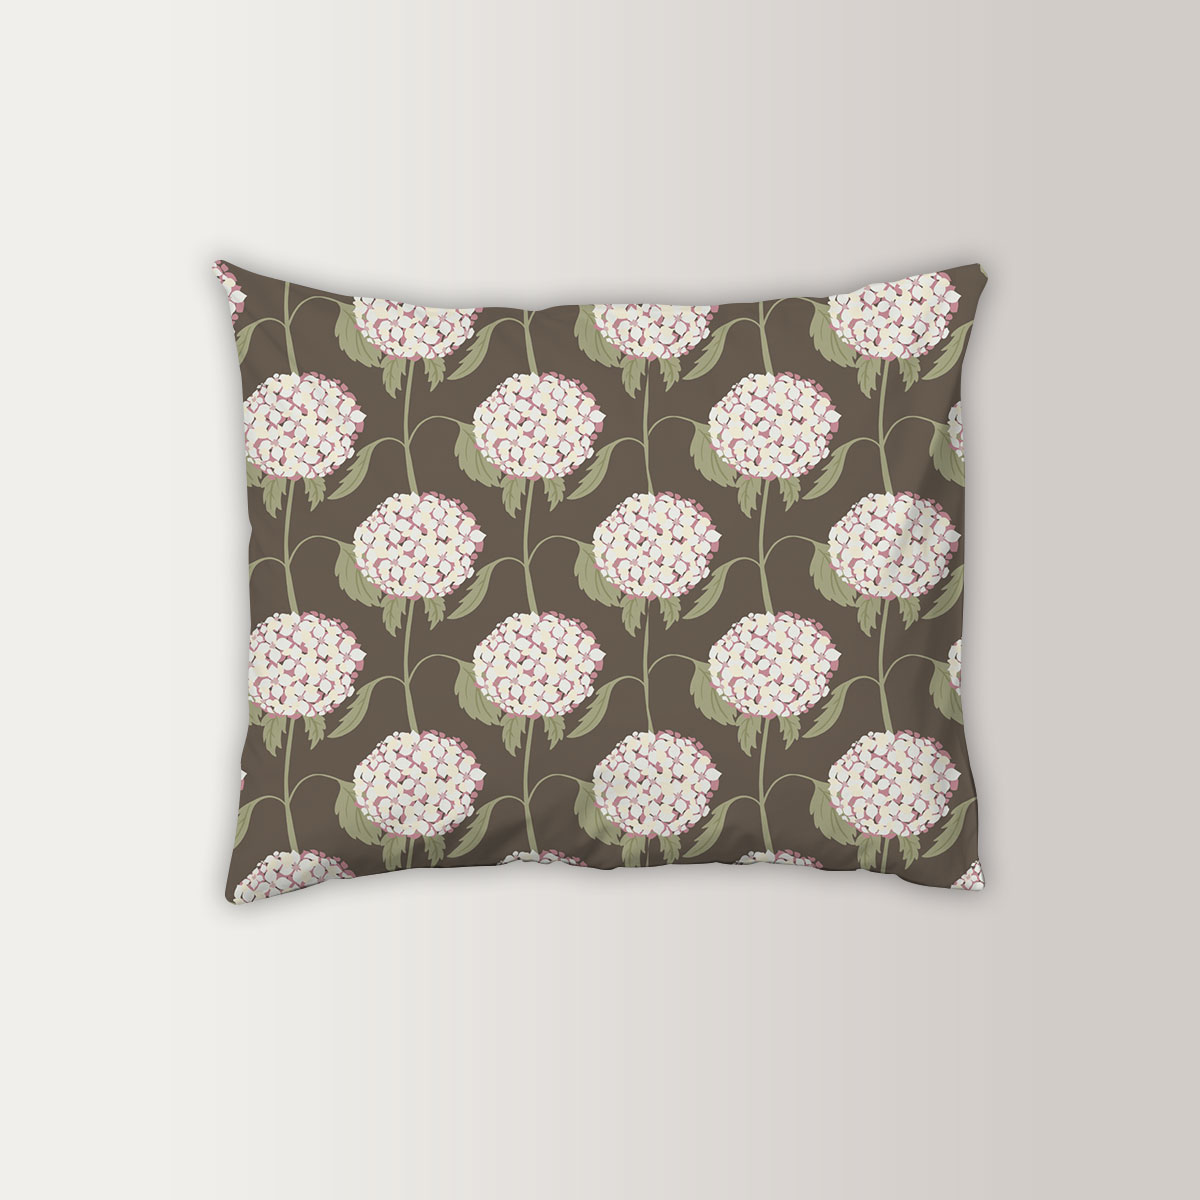 Abstract Nature With White Hydrangea Flowers Pillow Case